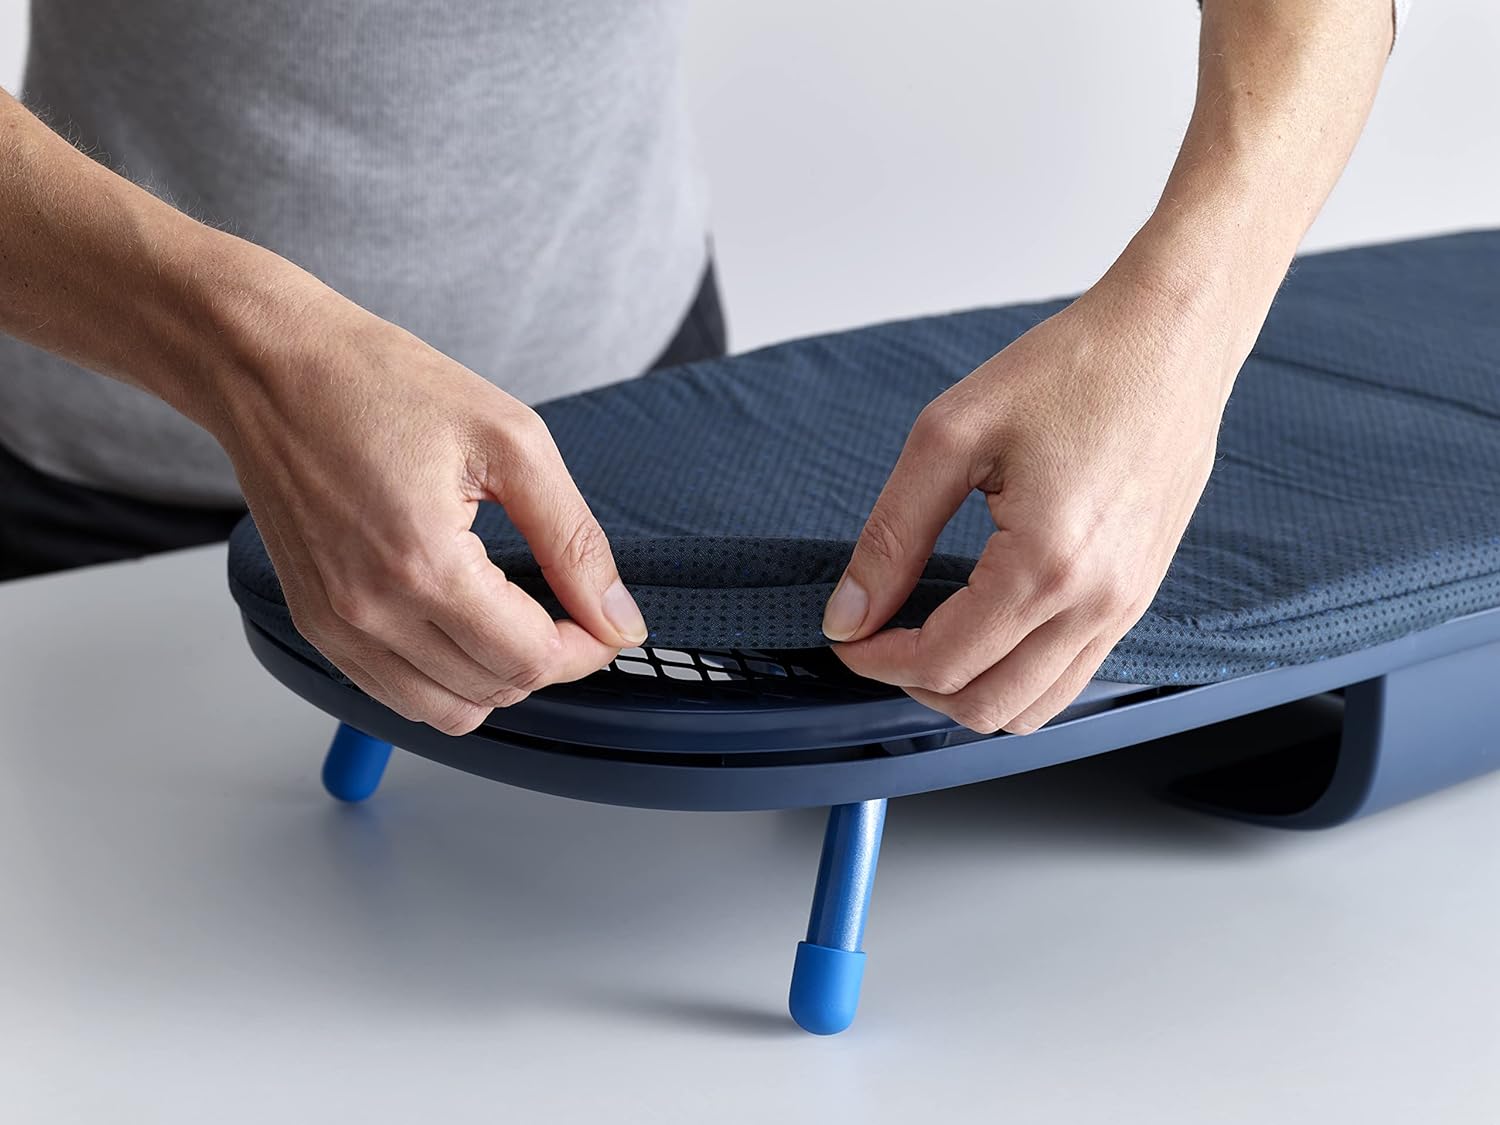 (⭐⭐ HOT SALE NOW) Pocket Plus Advanced Ironing Board Cover